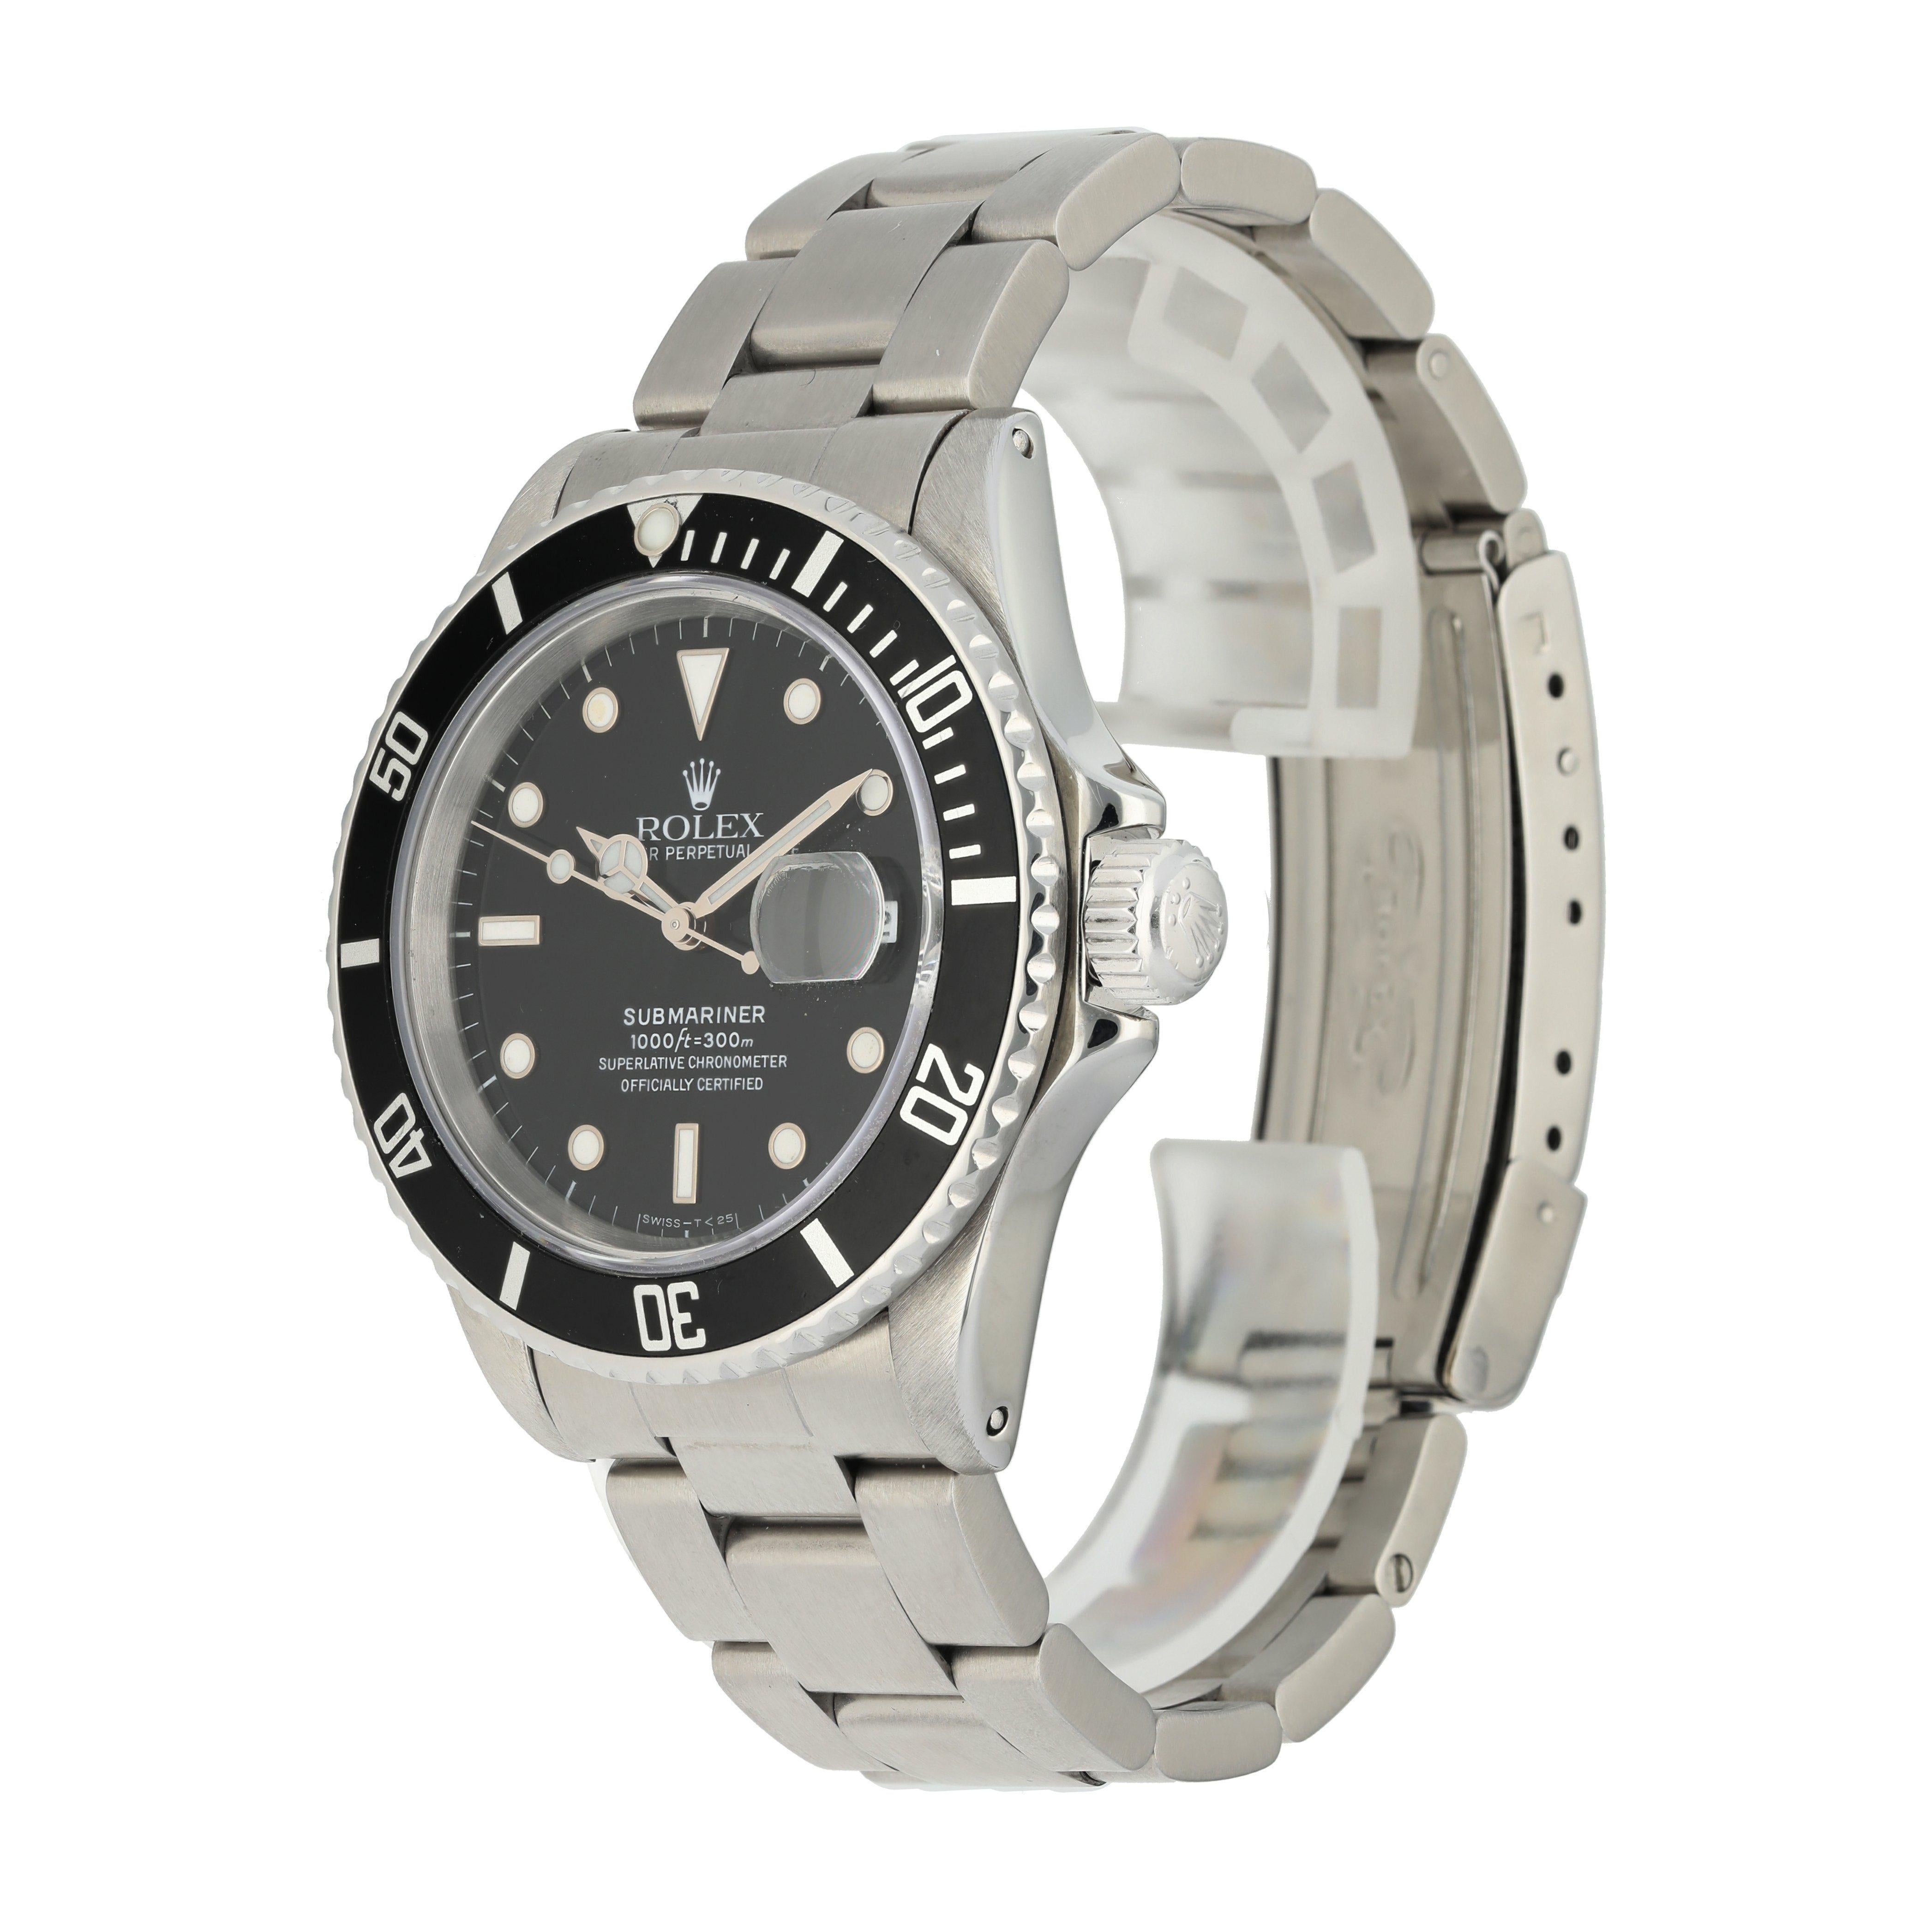 Rolex Submariner Date 16610 Men's Watch In Excellent Condition For Sale In New York, NY